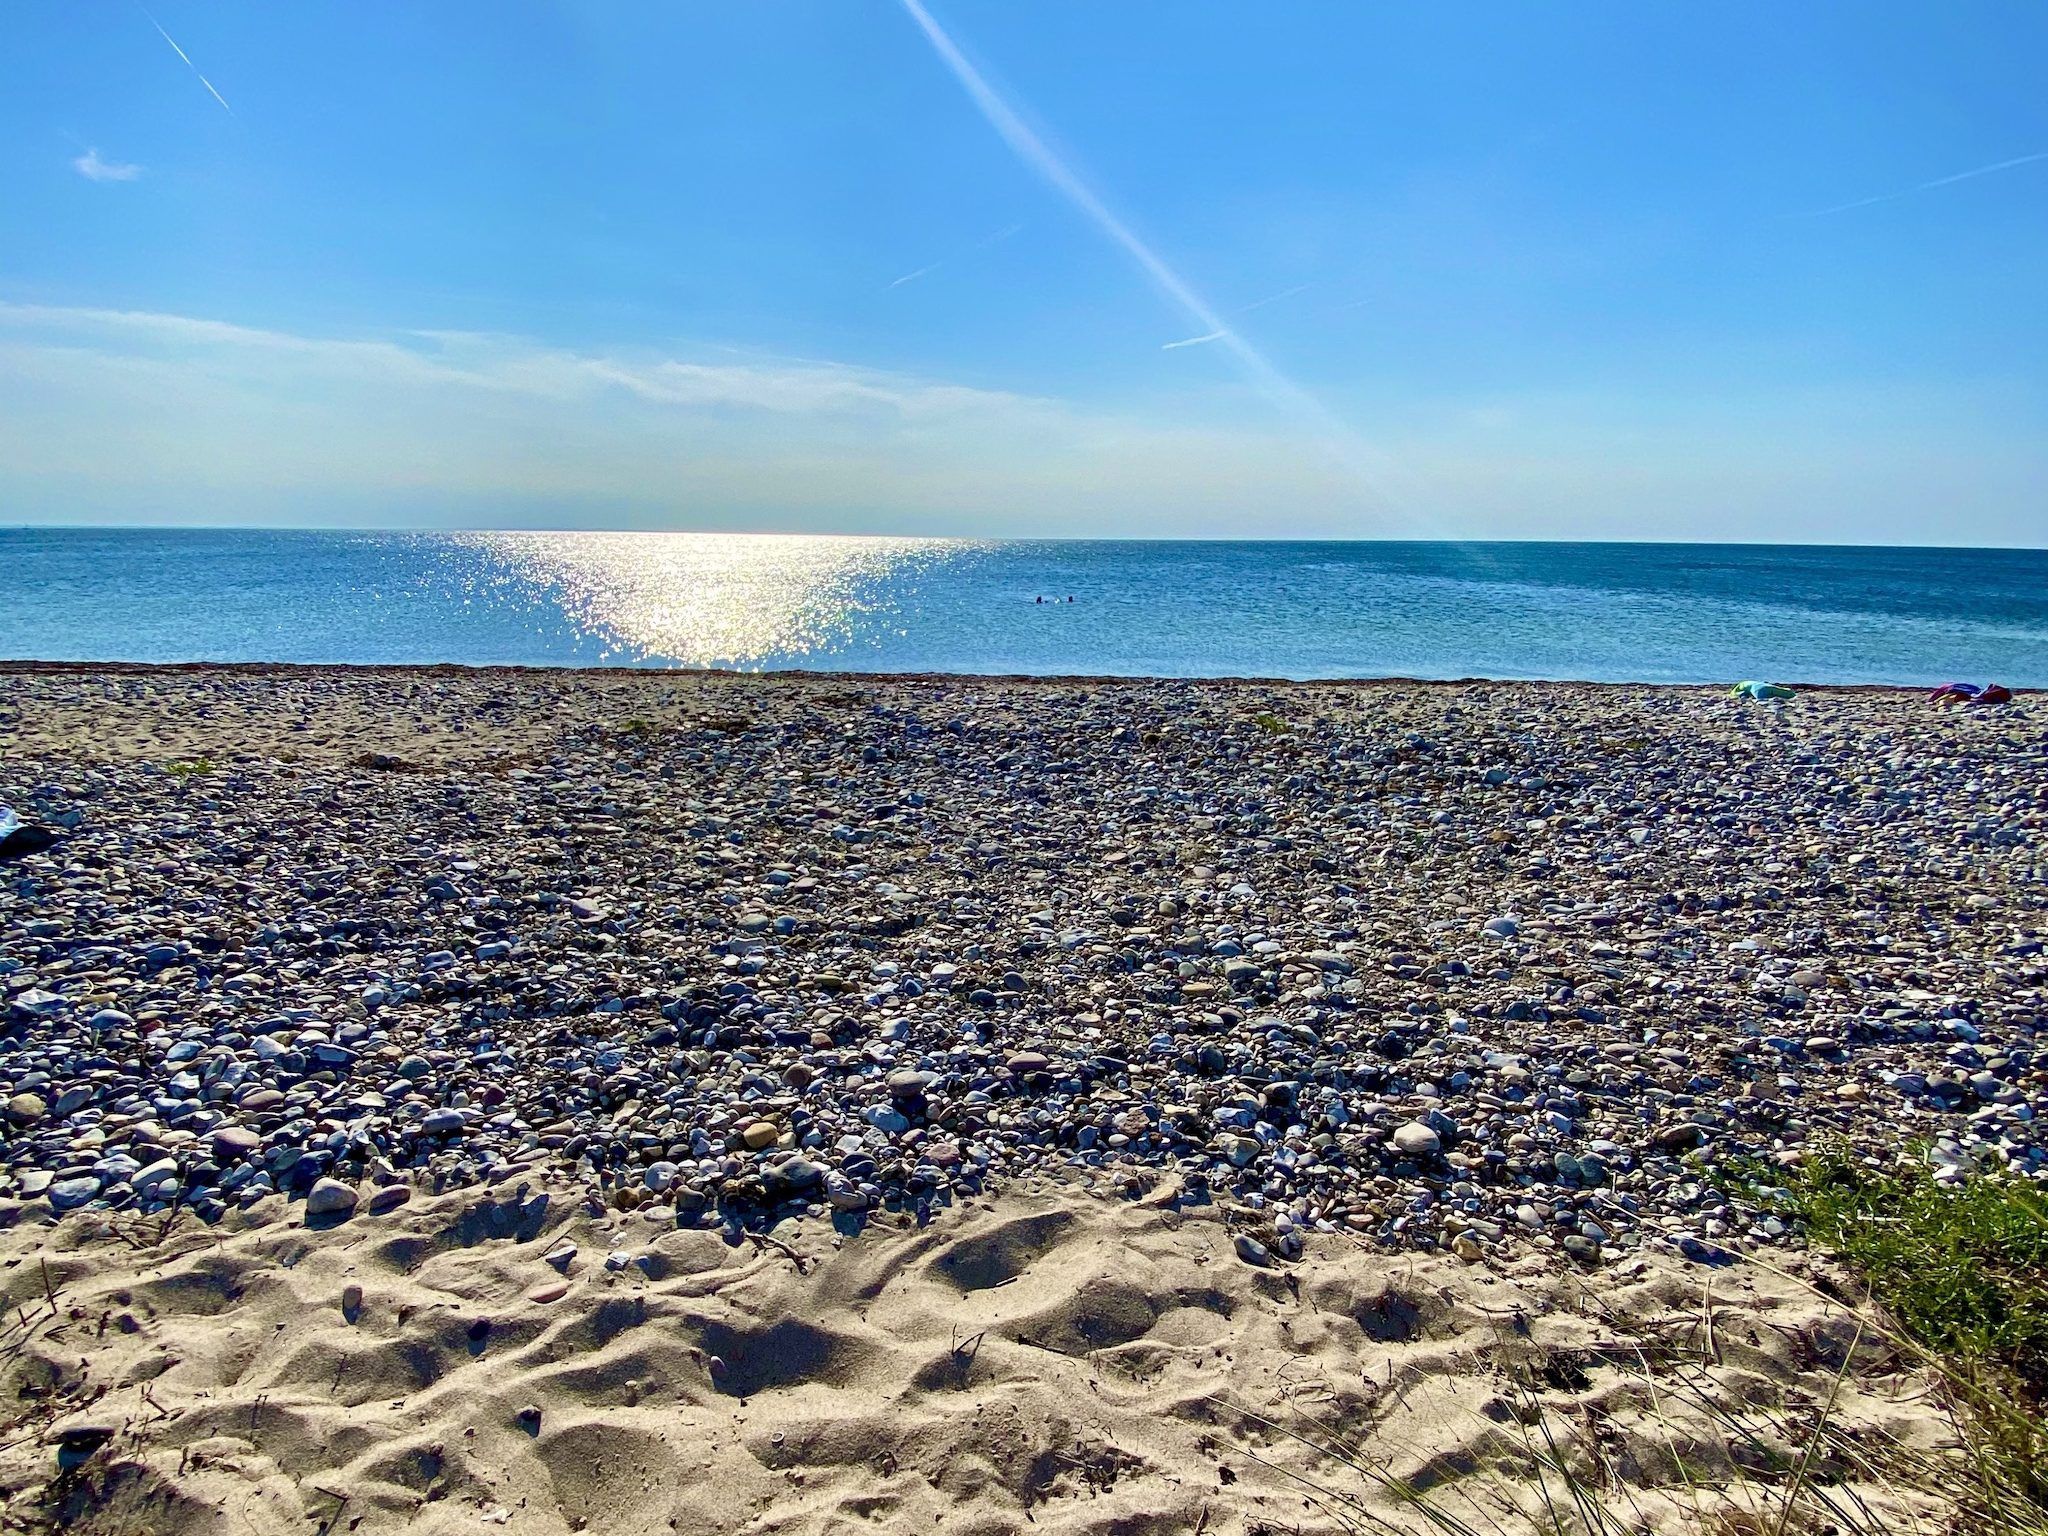 Fehmarn travel report: During our short vacation we were able to enjoy the peace and quiet on the beach and really relax. Photo: Sascha Tegtmeyer